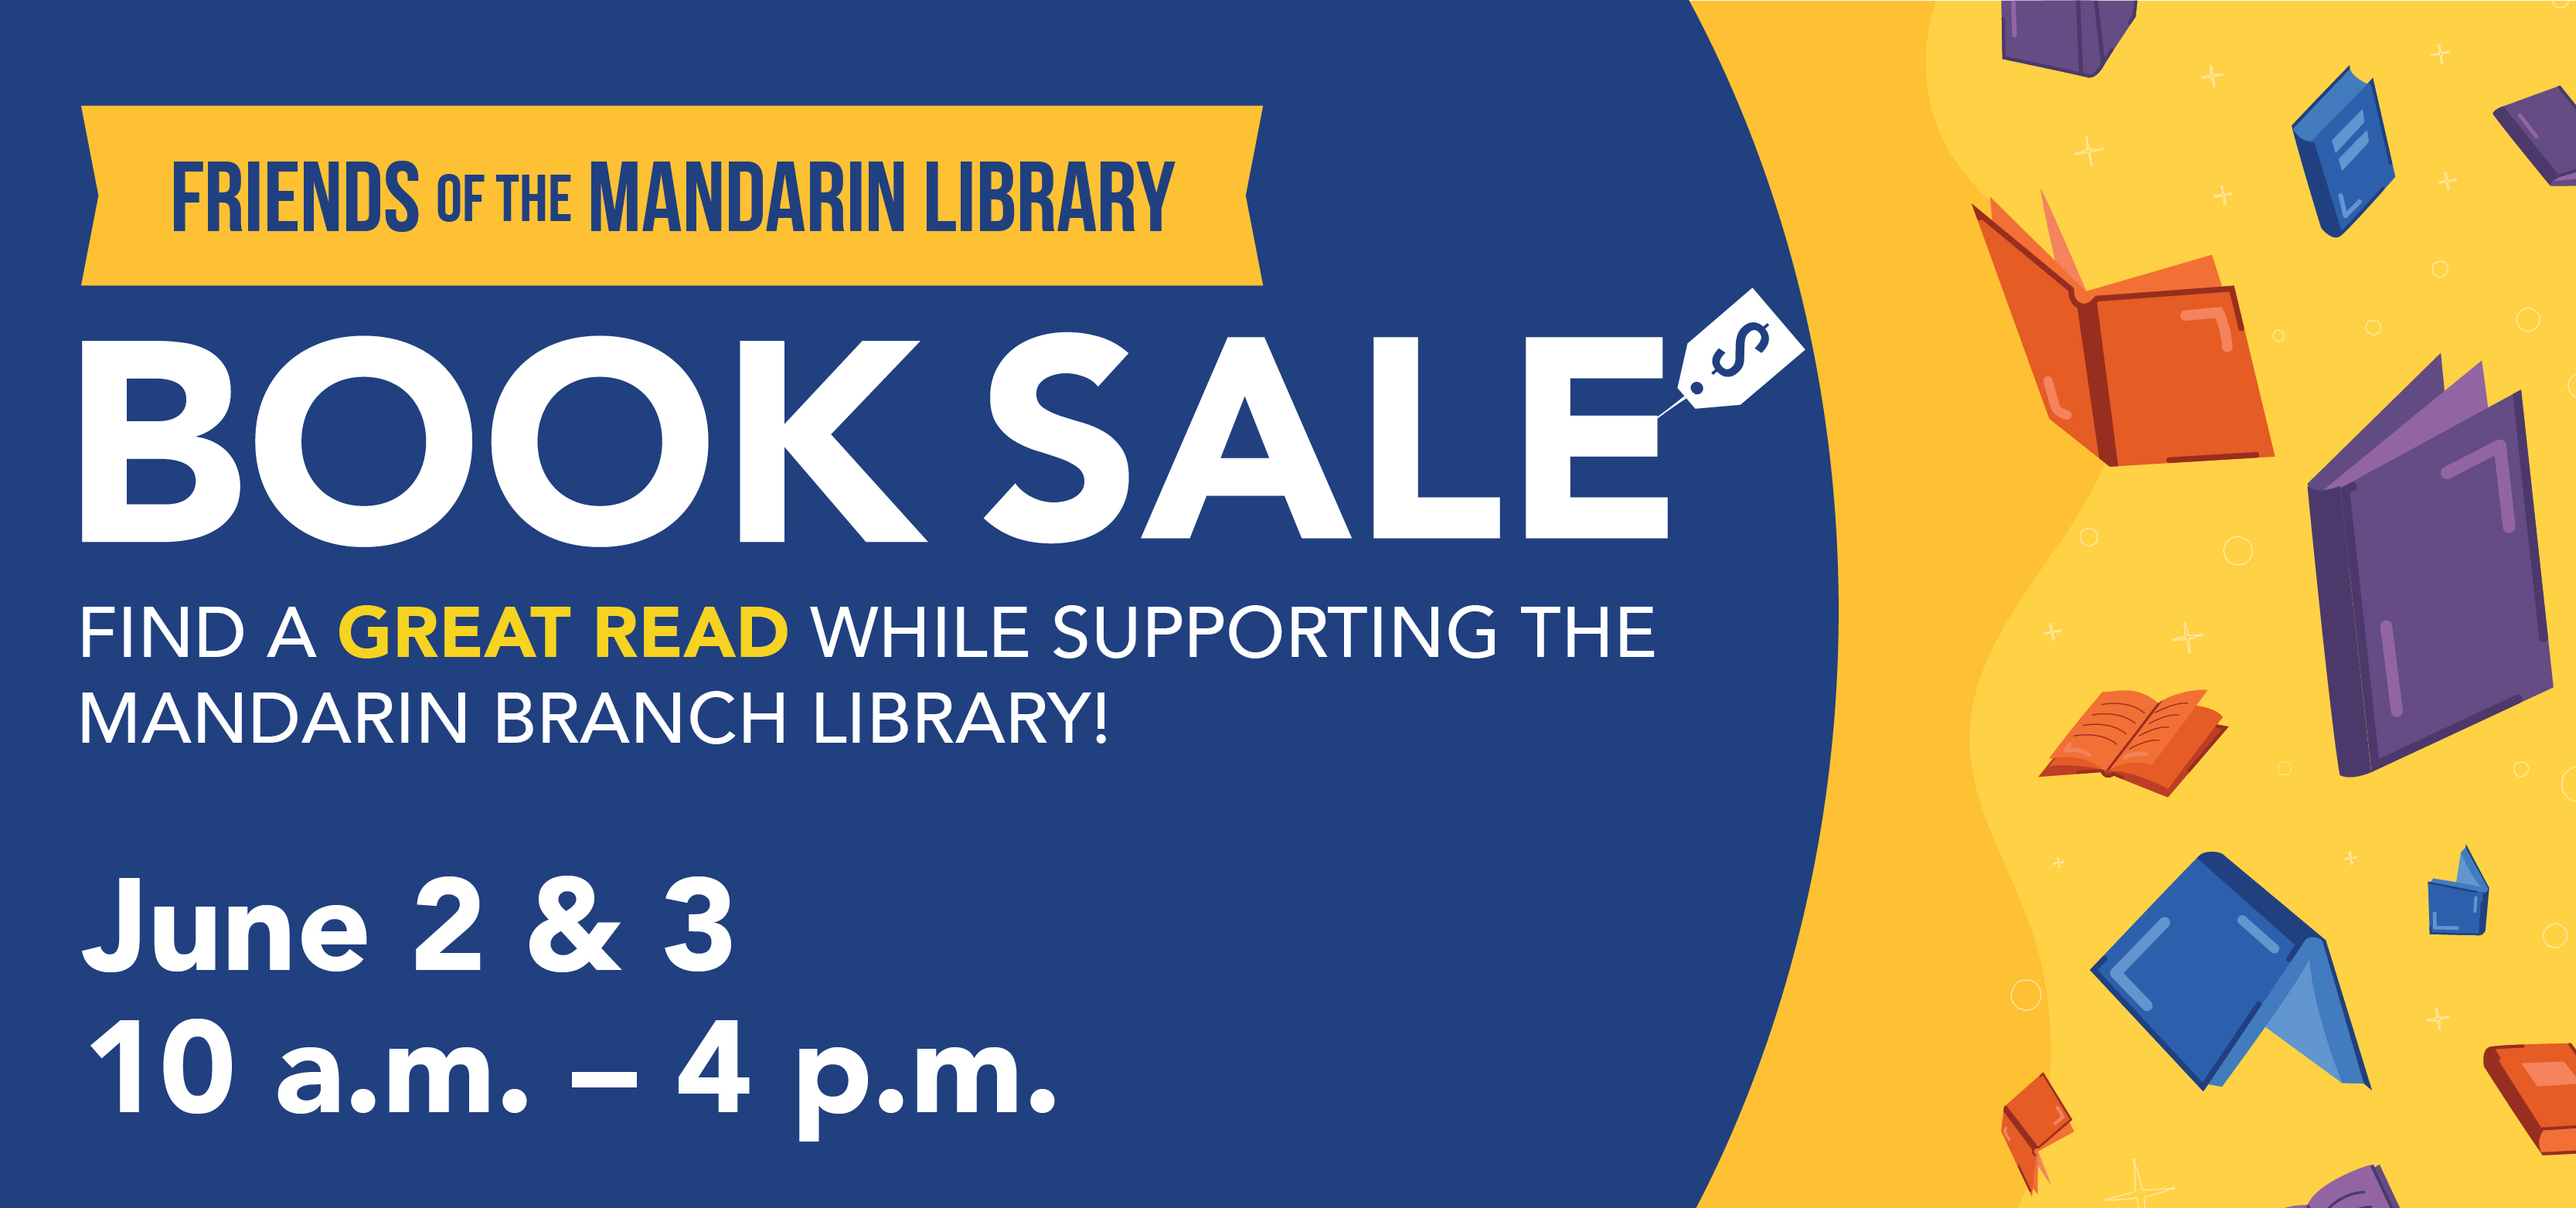 Friends of the Mandarin Library book sale on June 2 and 3 from 10 am to 4 pm.